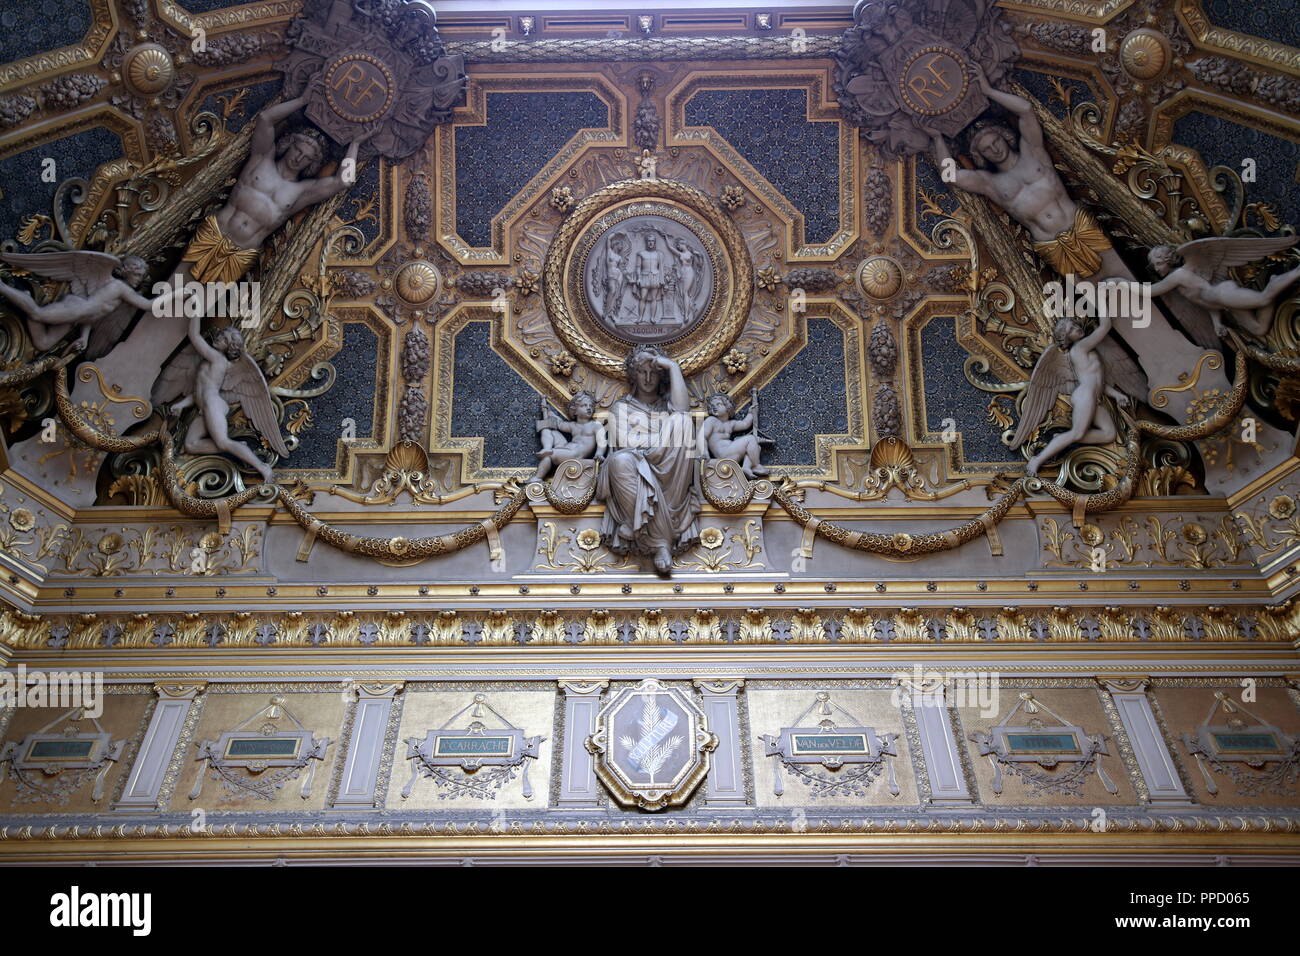 An ornate ceiling in The Louvre in Paris, France Stock Photo